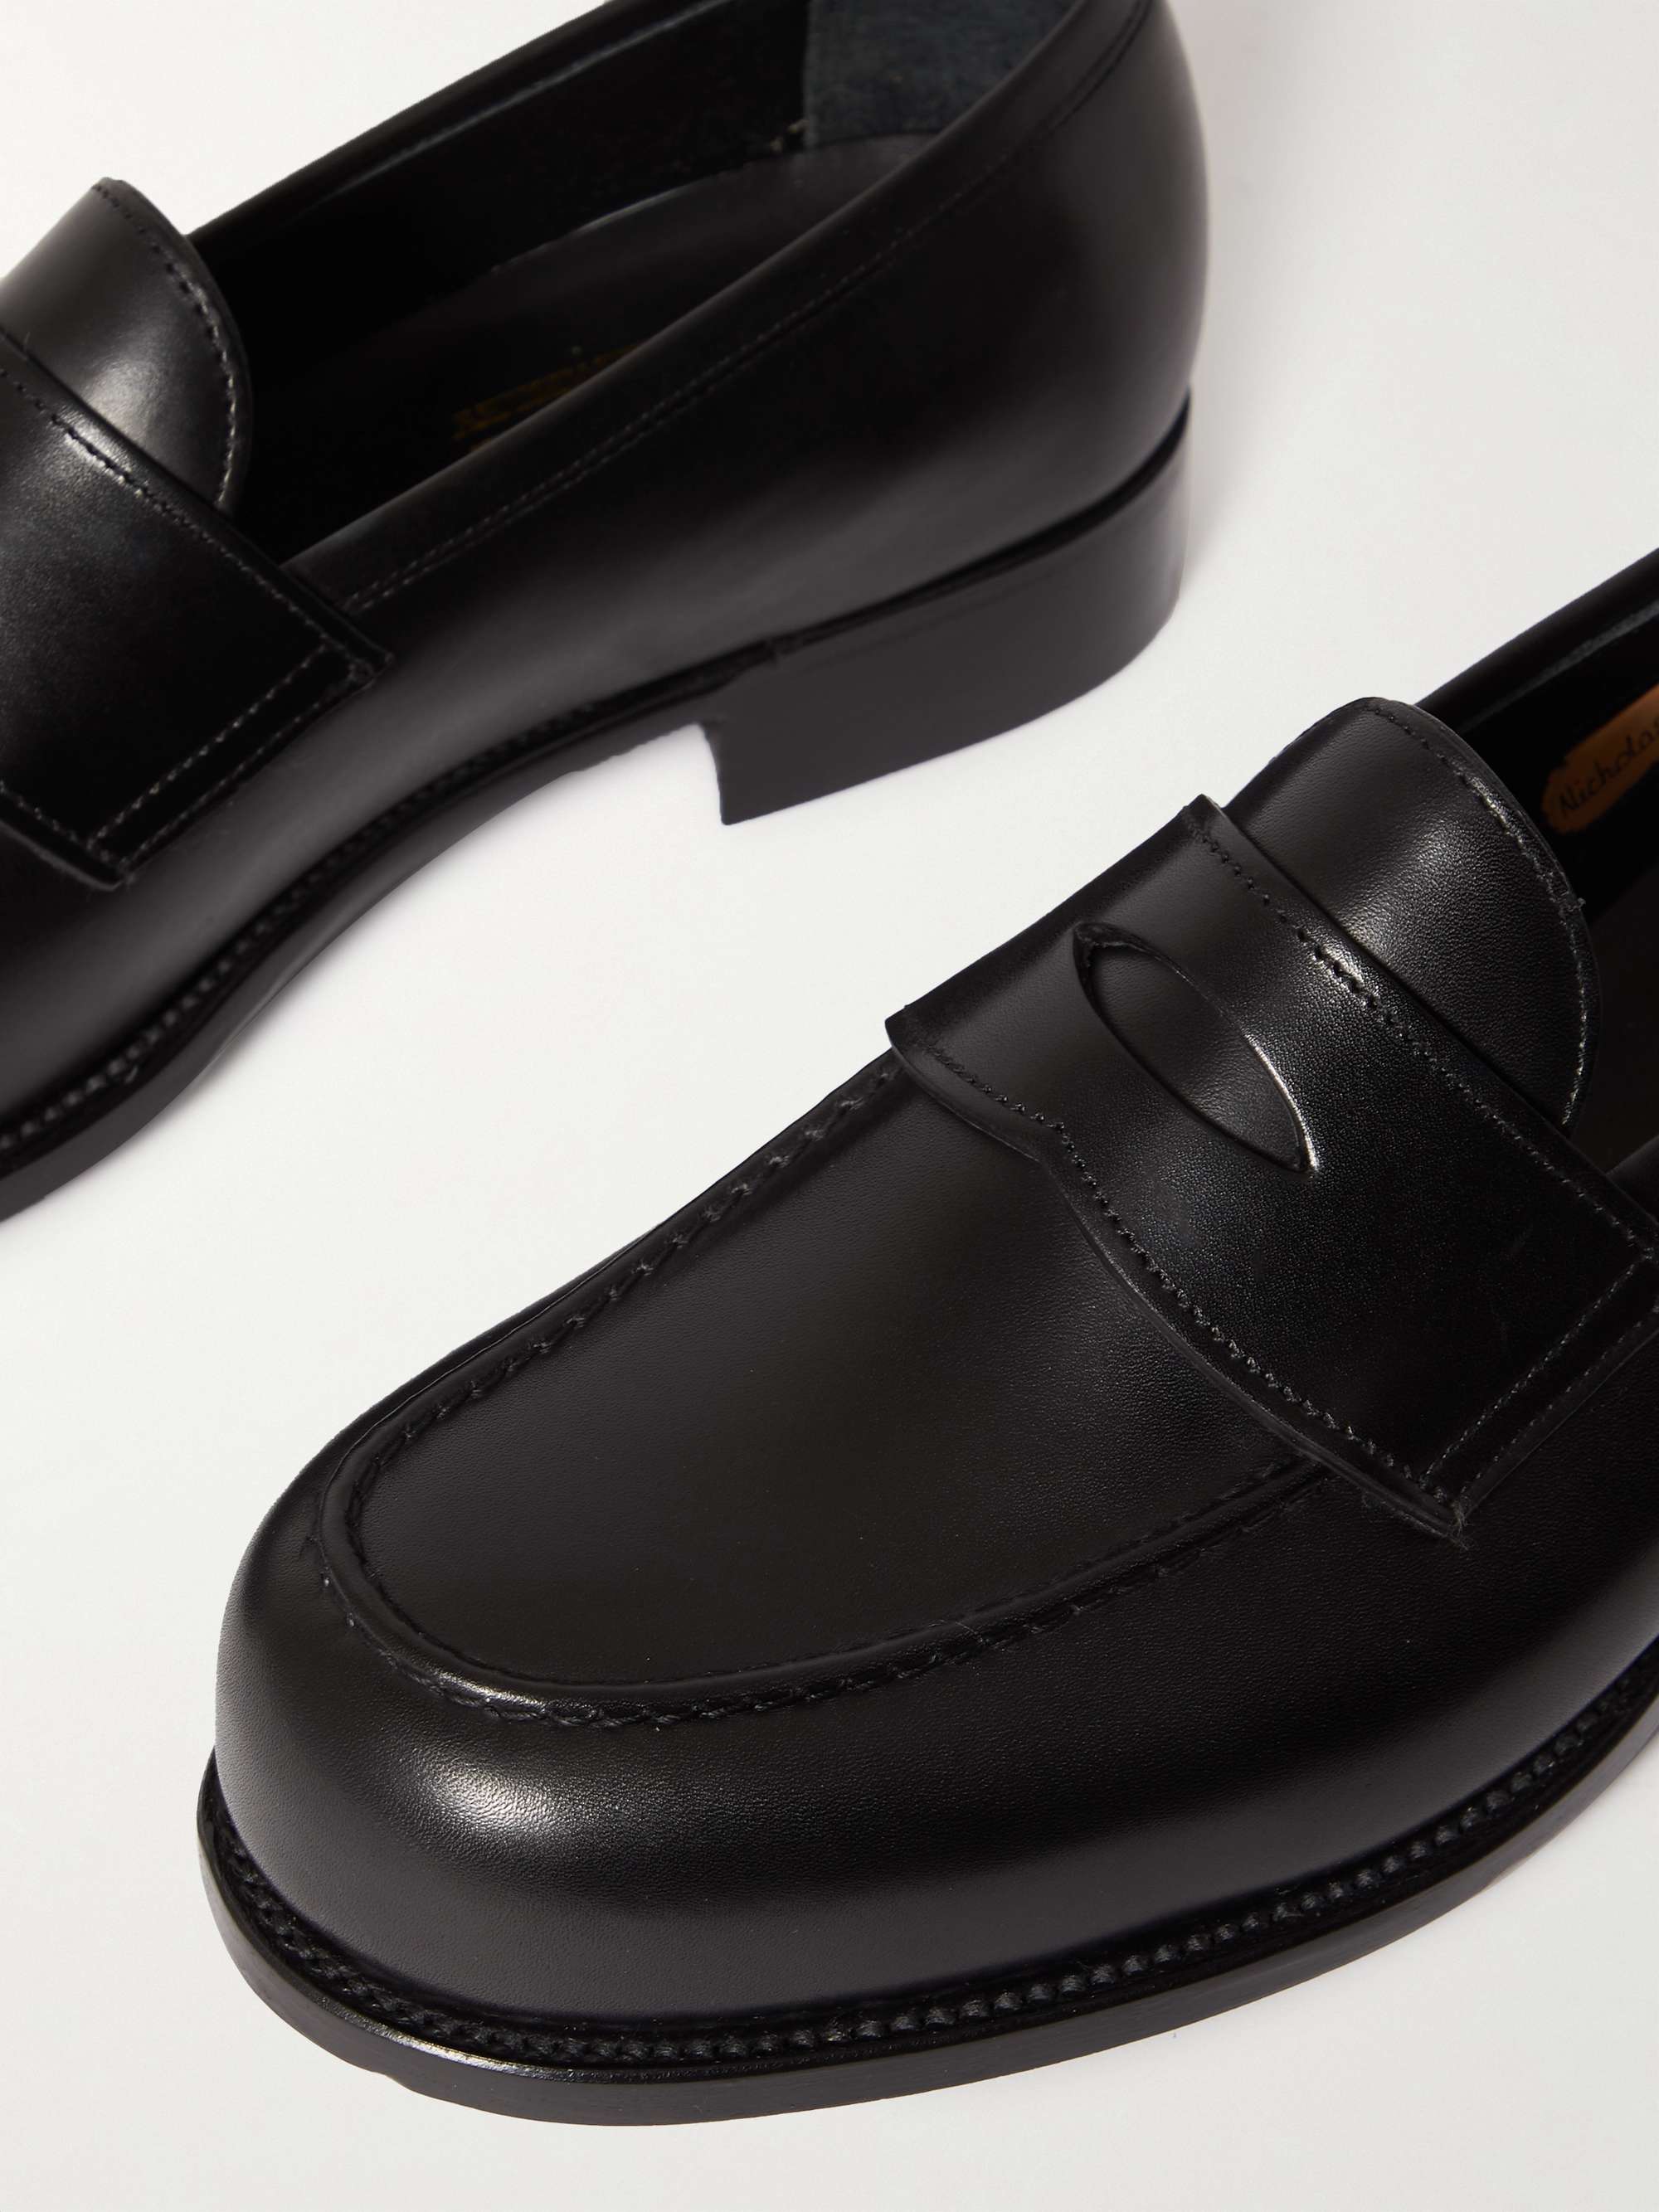 GEORGE CLEVERLEY Nicholas Leather Loafers